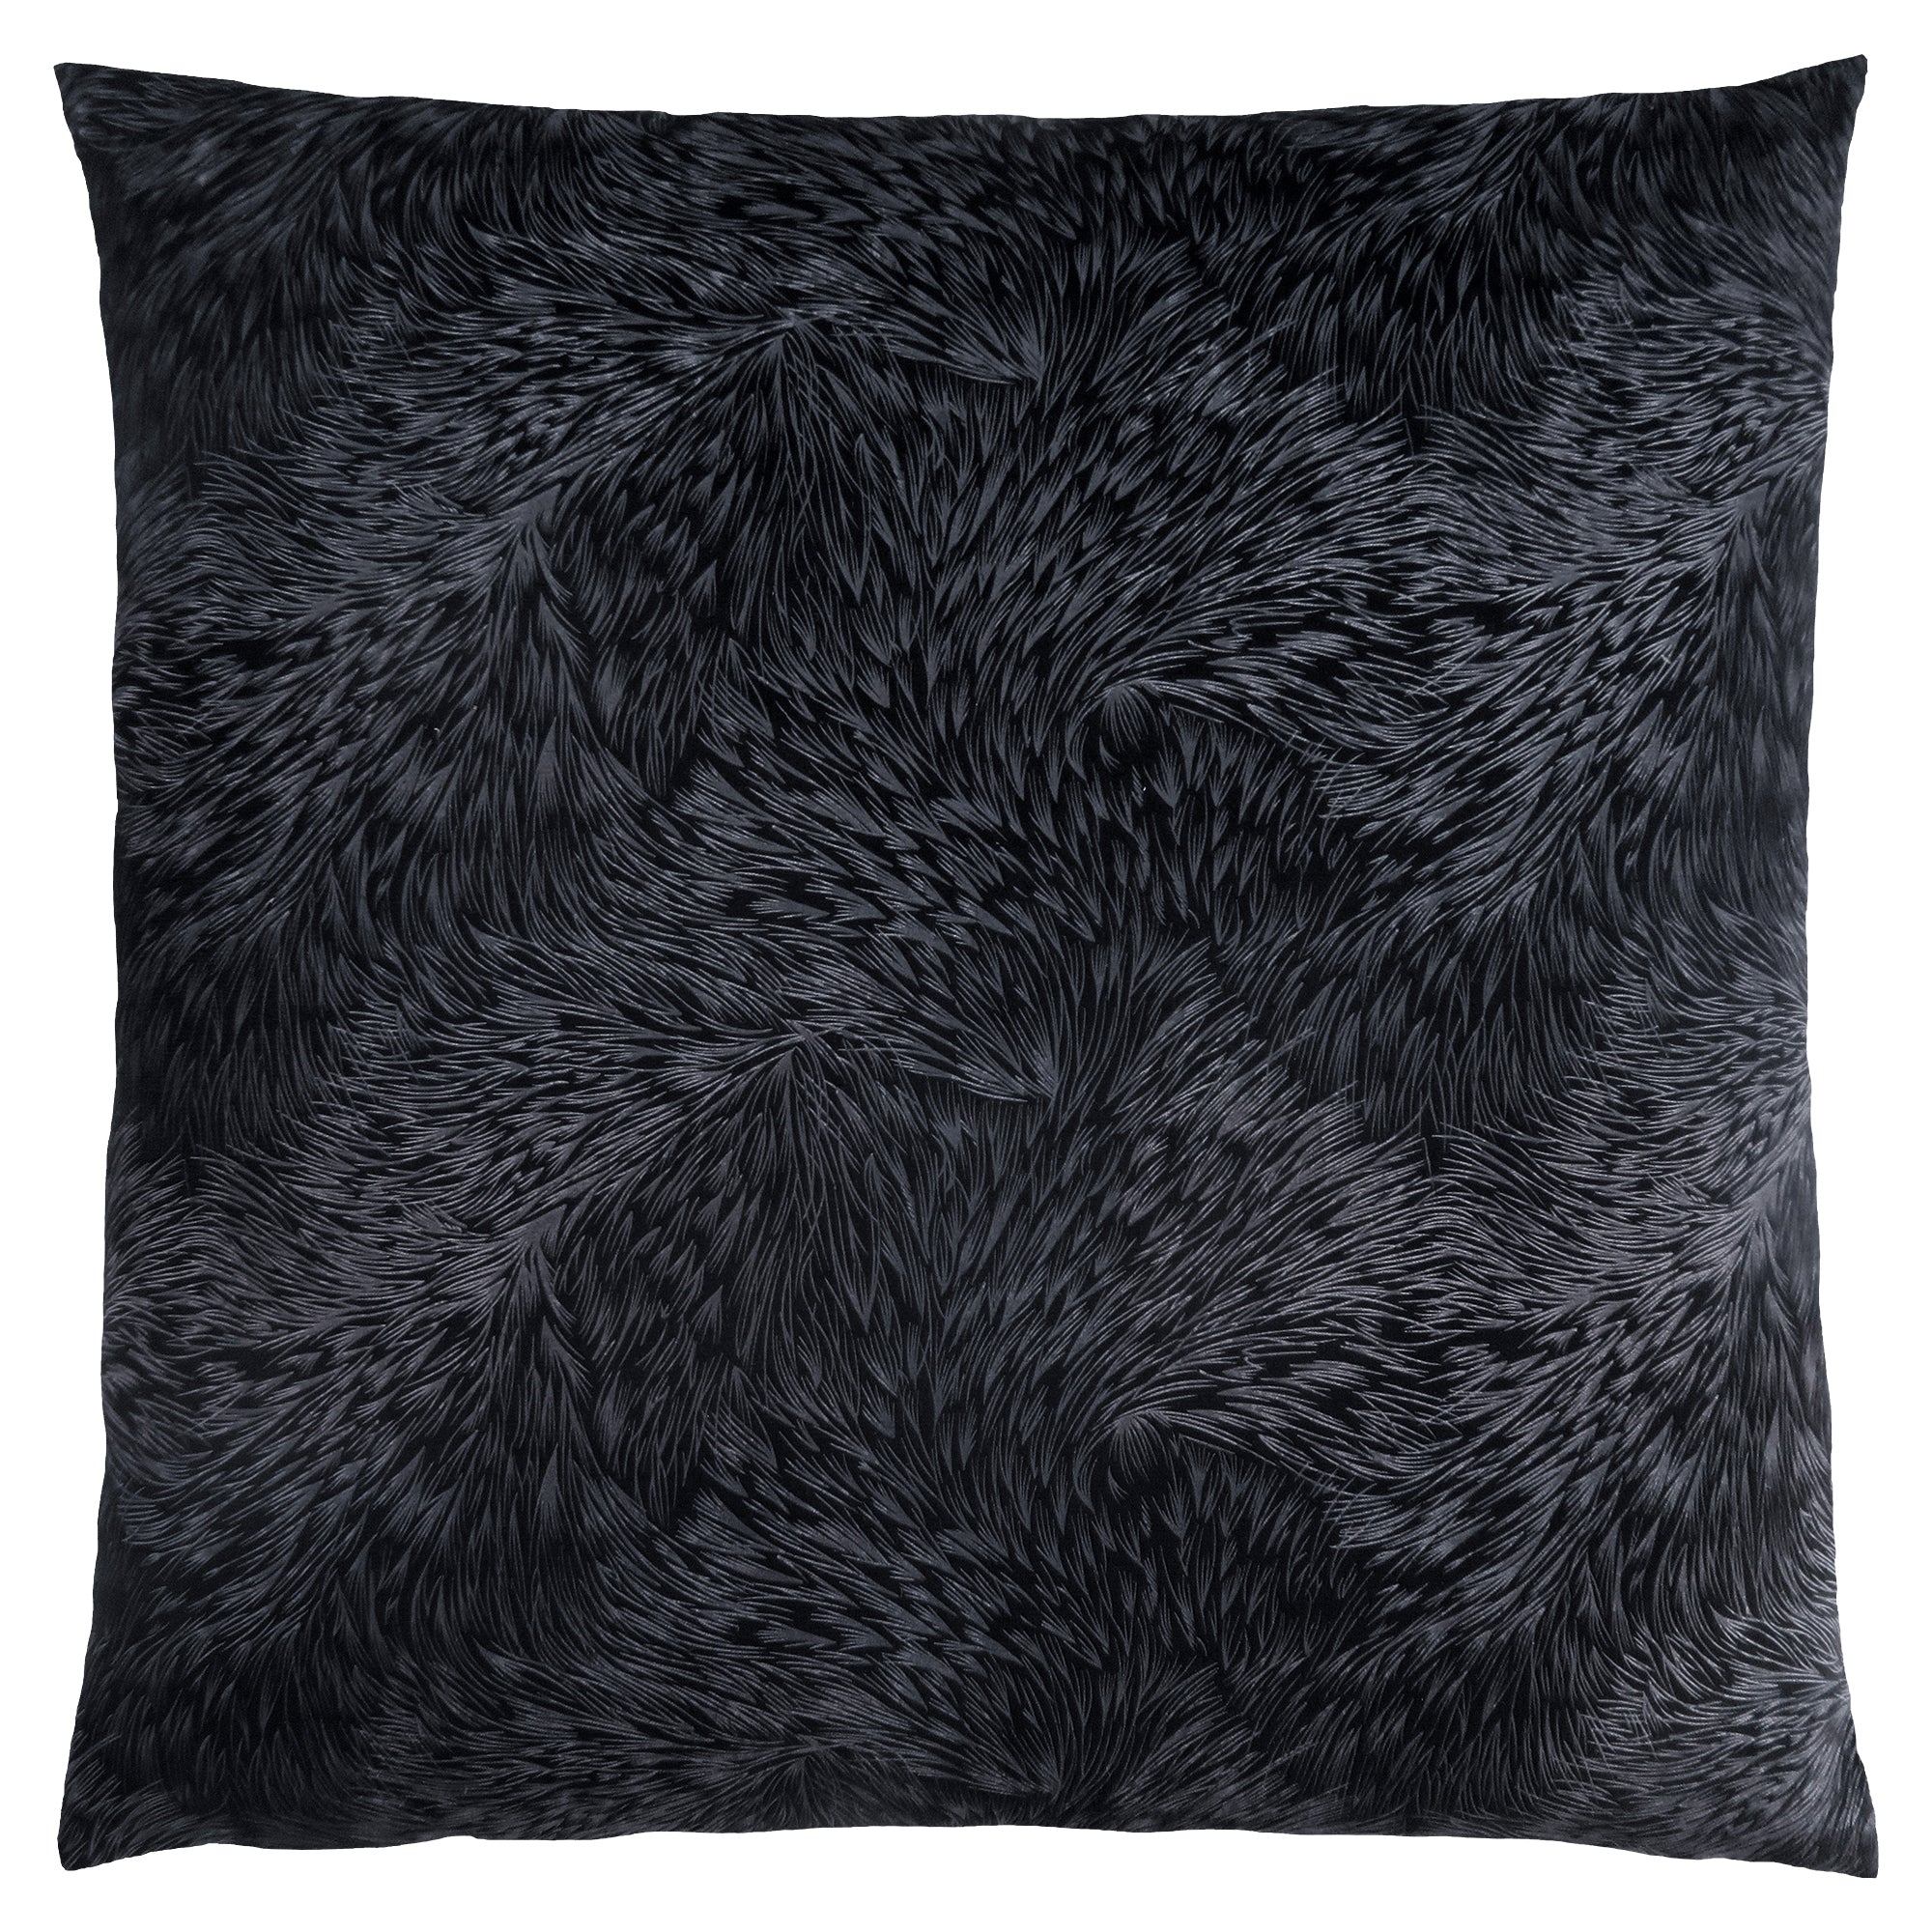 MN-919332    Pillows, 18 X 18 Square, Insert Included, Decorative Throw, Accent, Sofa, Couch, Bed, Lush Velvet-Look Polyester Fabric, Hypoallergenic Soft Polyester Insert, Black, Glam